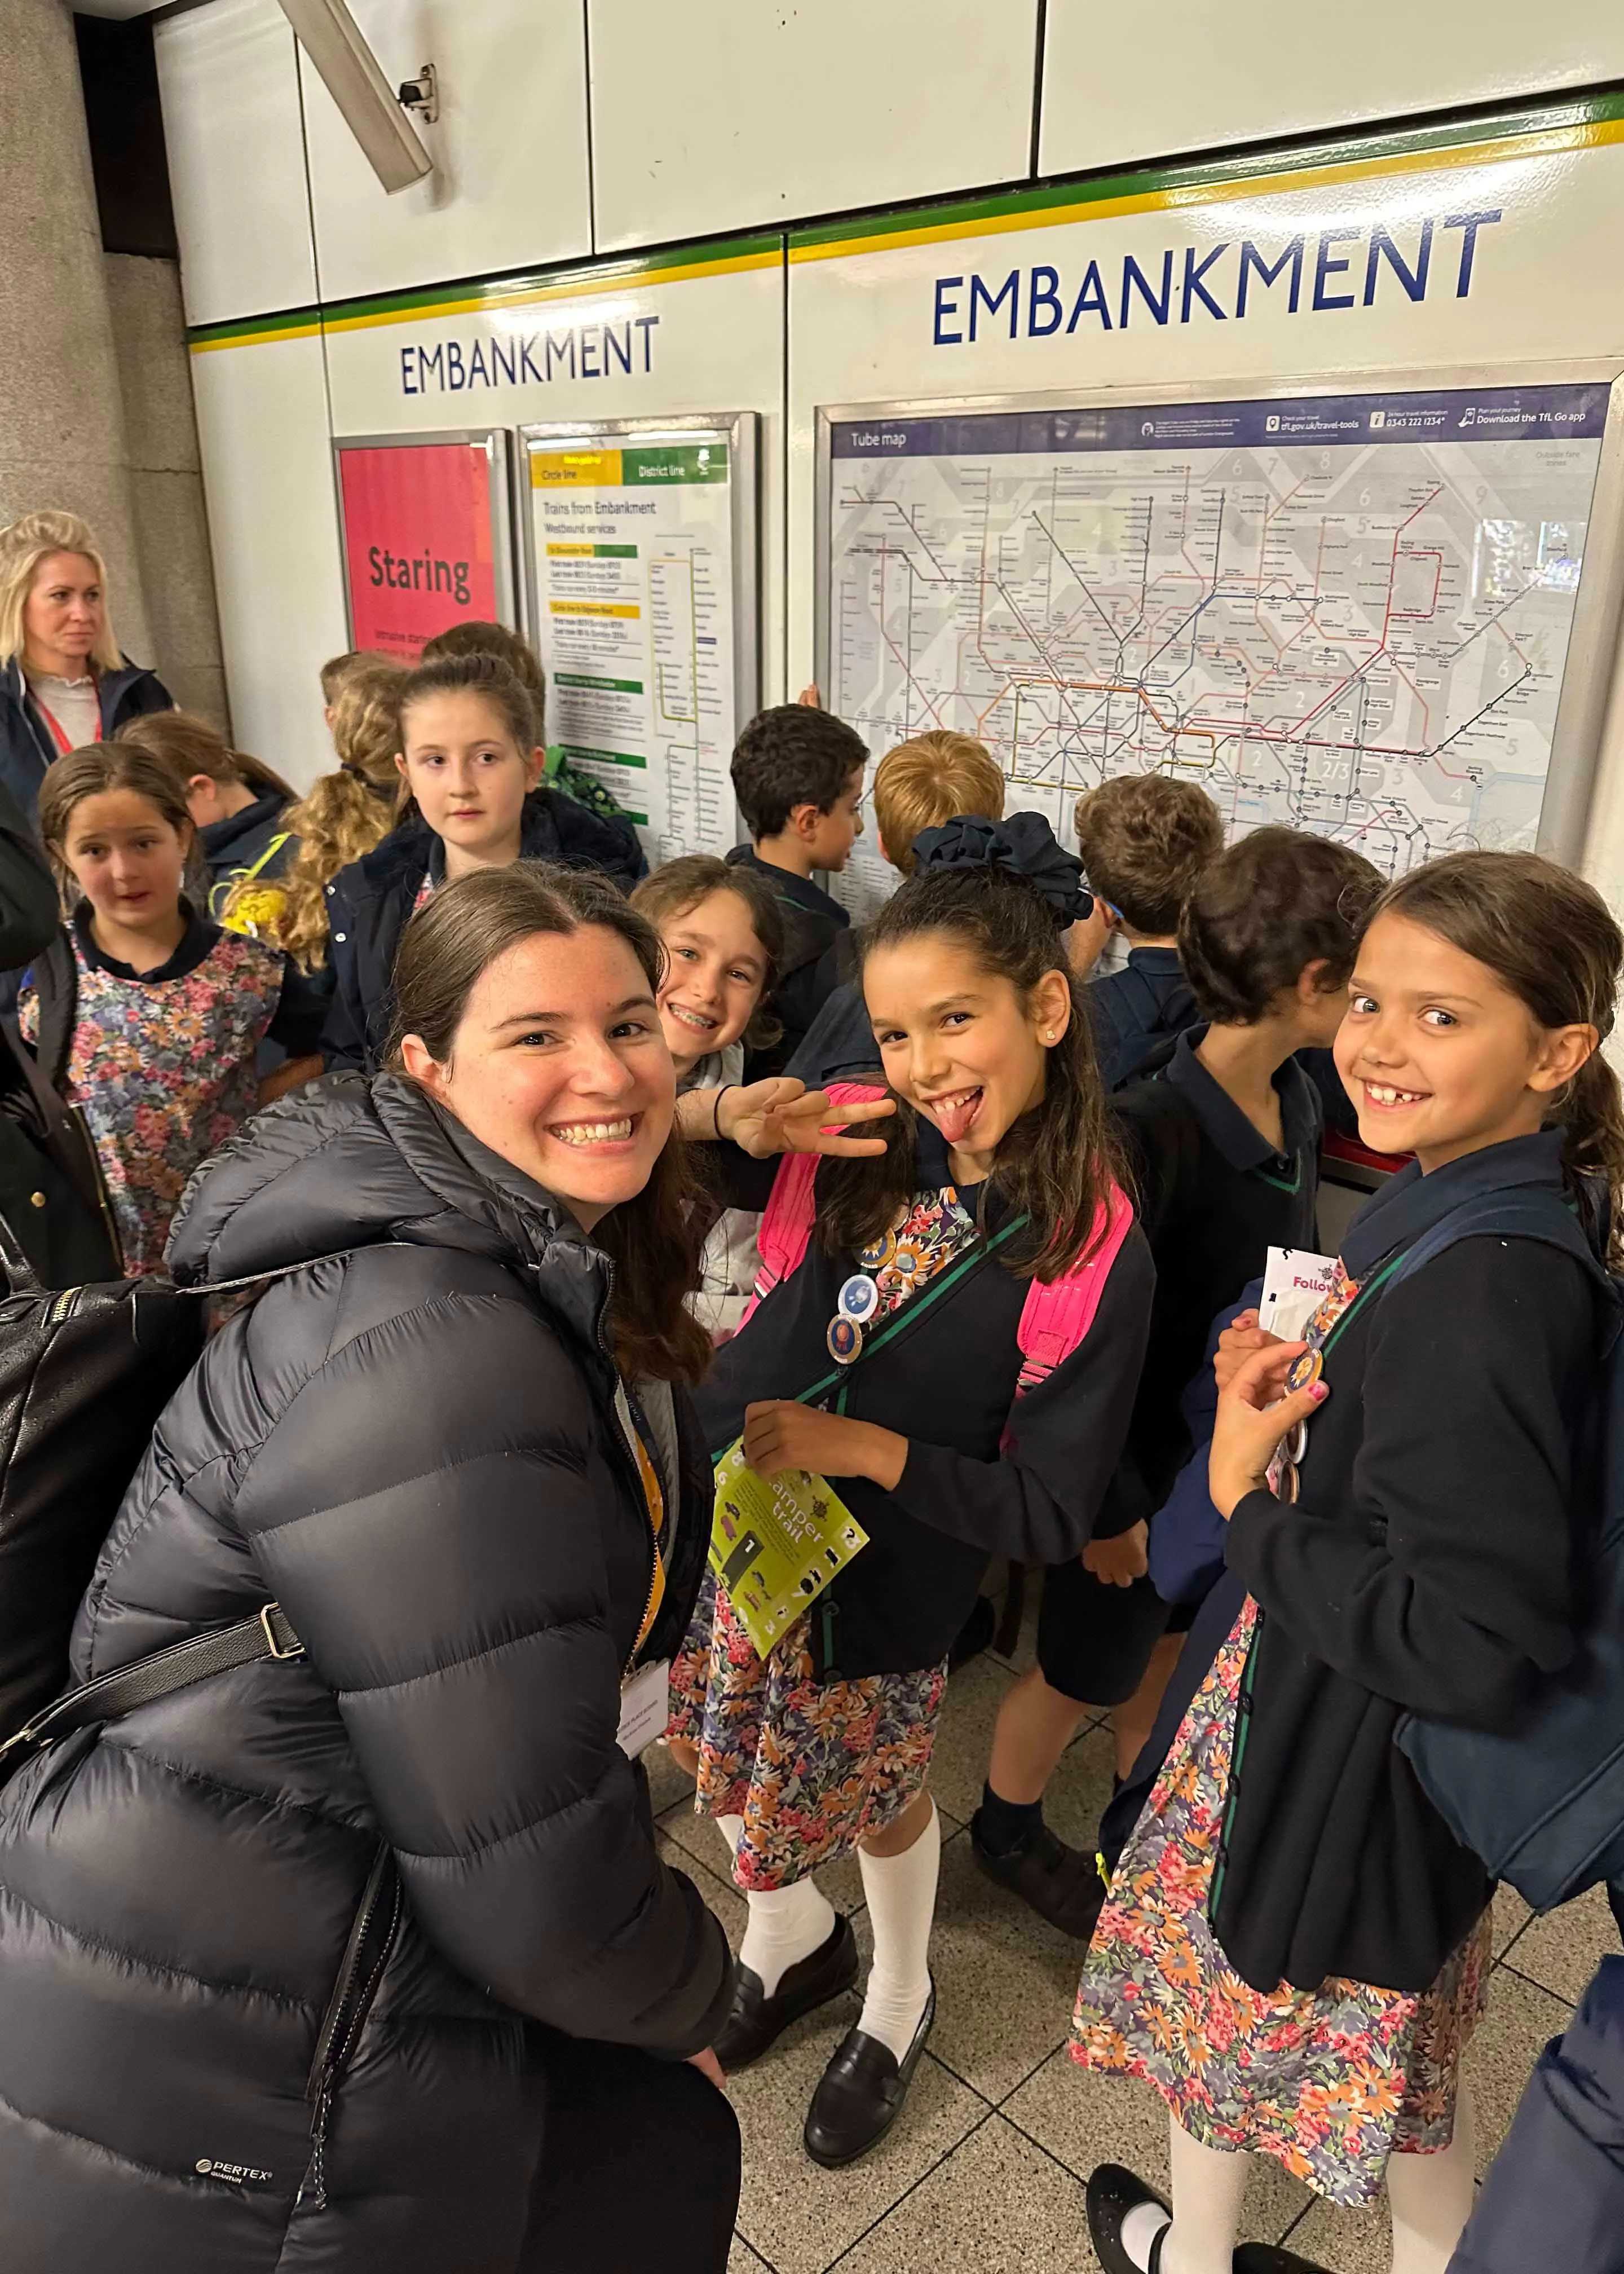 Prep 4 pupils riding the tube in London | Ibstock Place School, a private school near Richmond, Barnes, Putney, Kingston, and Wandsworth on an overseas trip. 